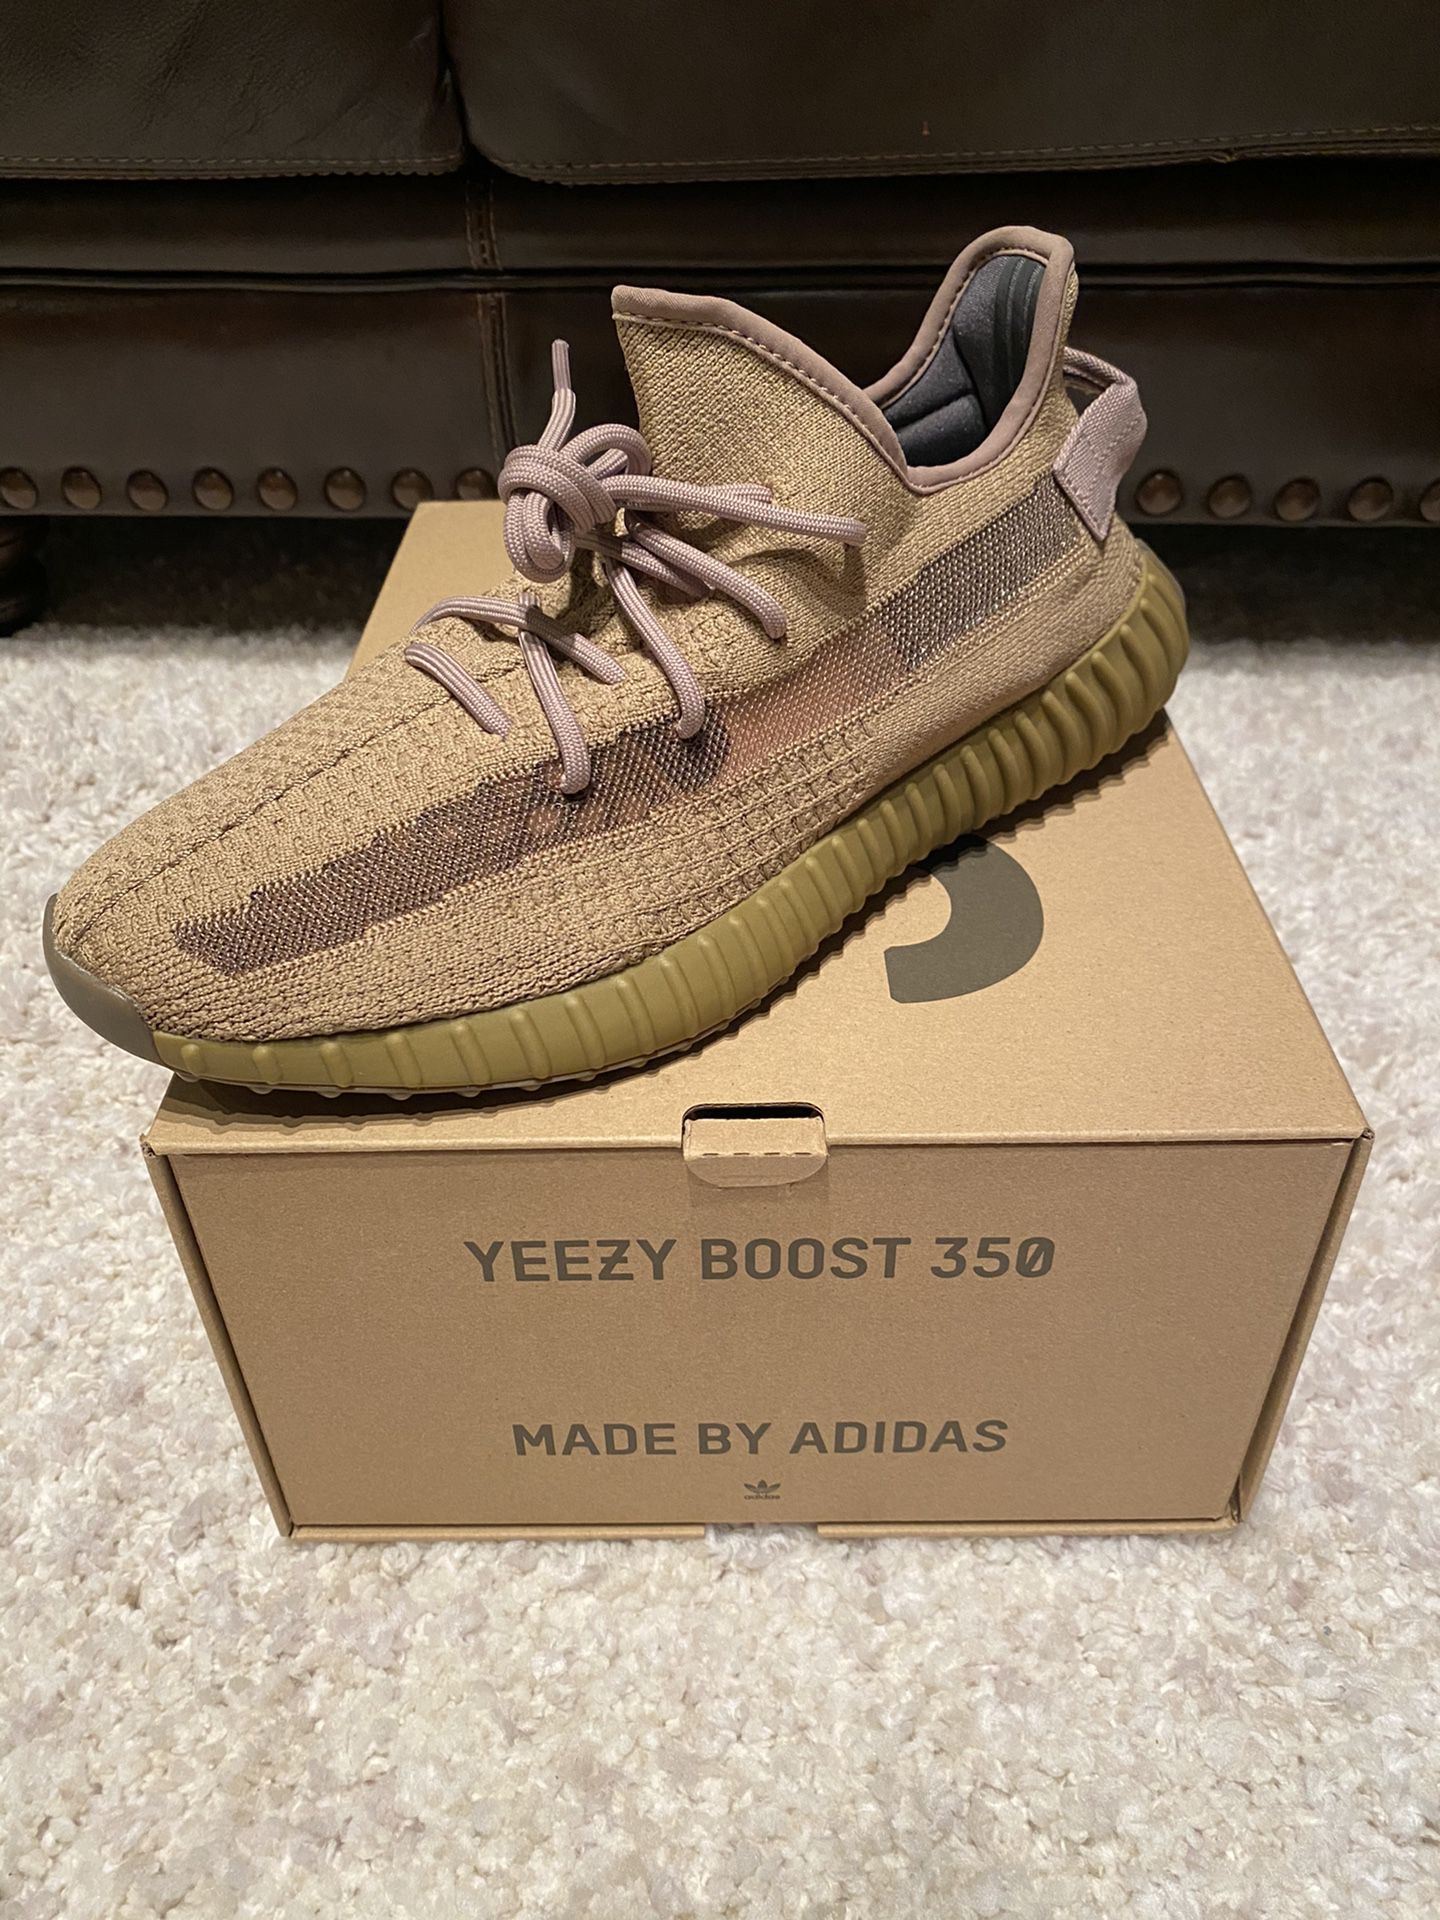 Yeezy Boost 350 V2 “Earth” size 12.5. Brand New